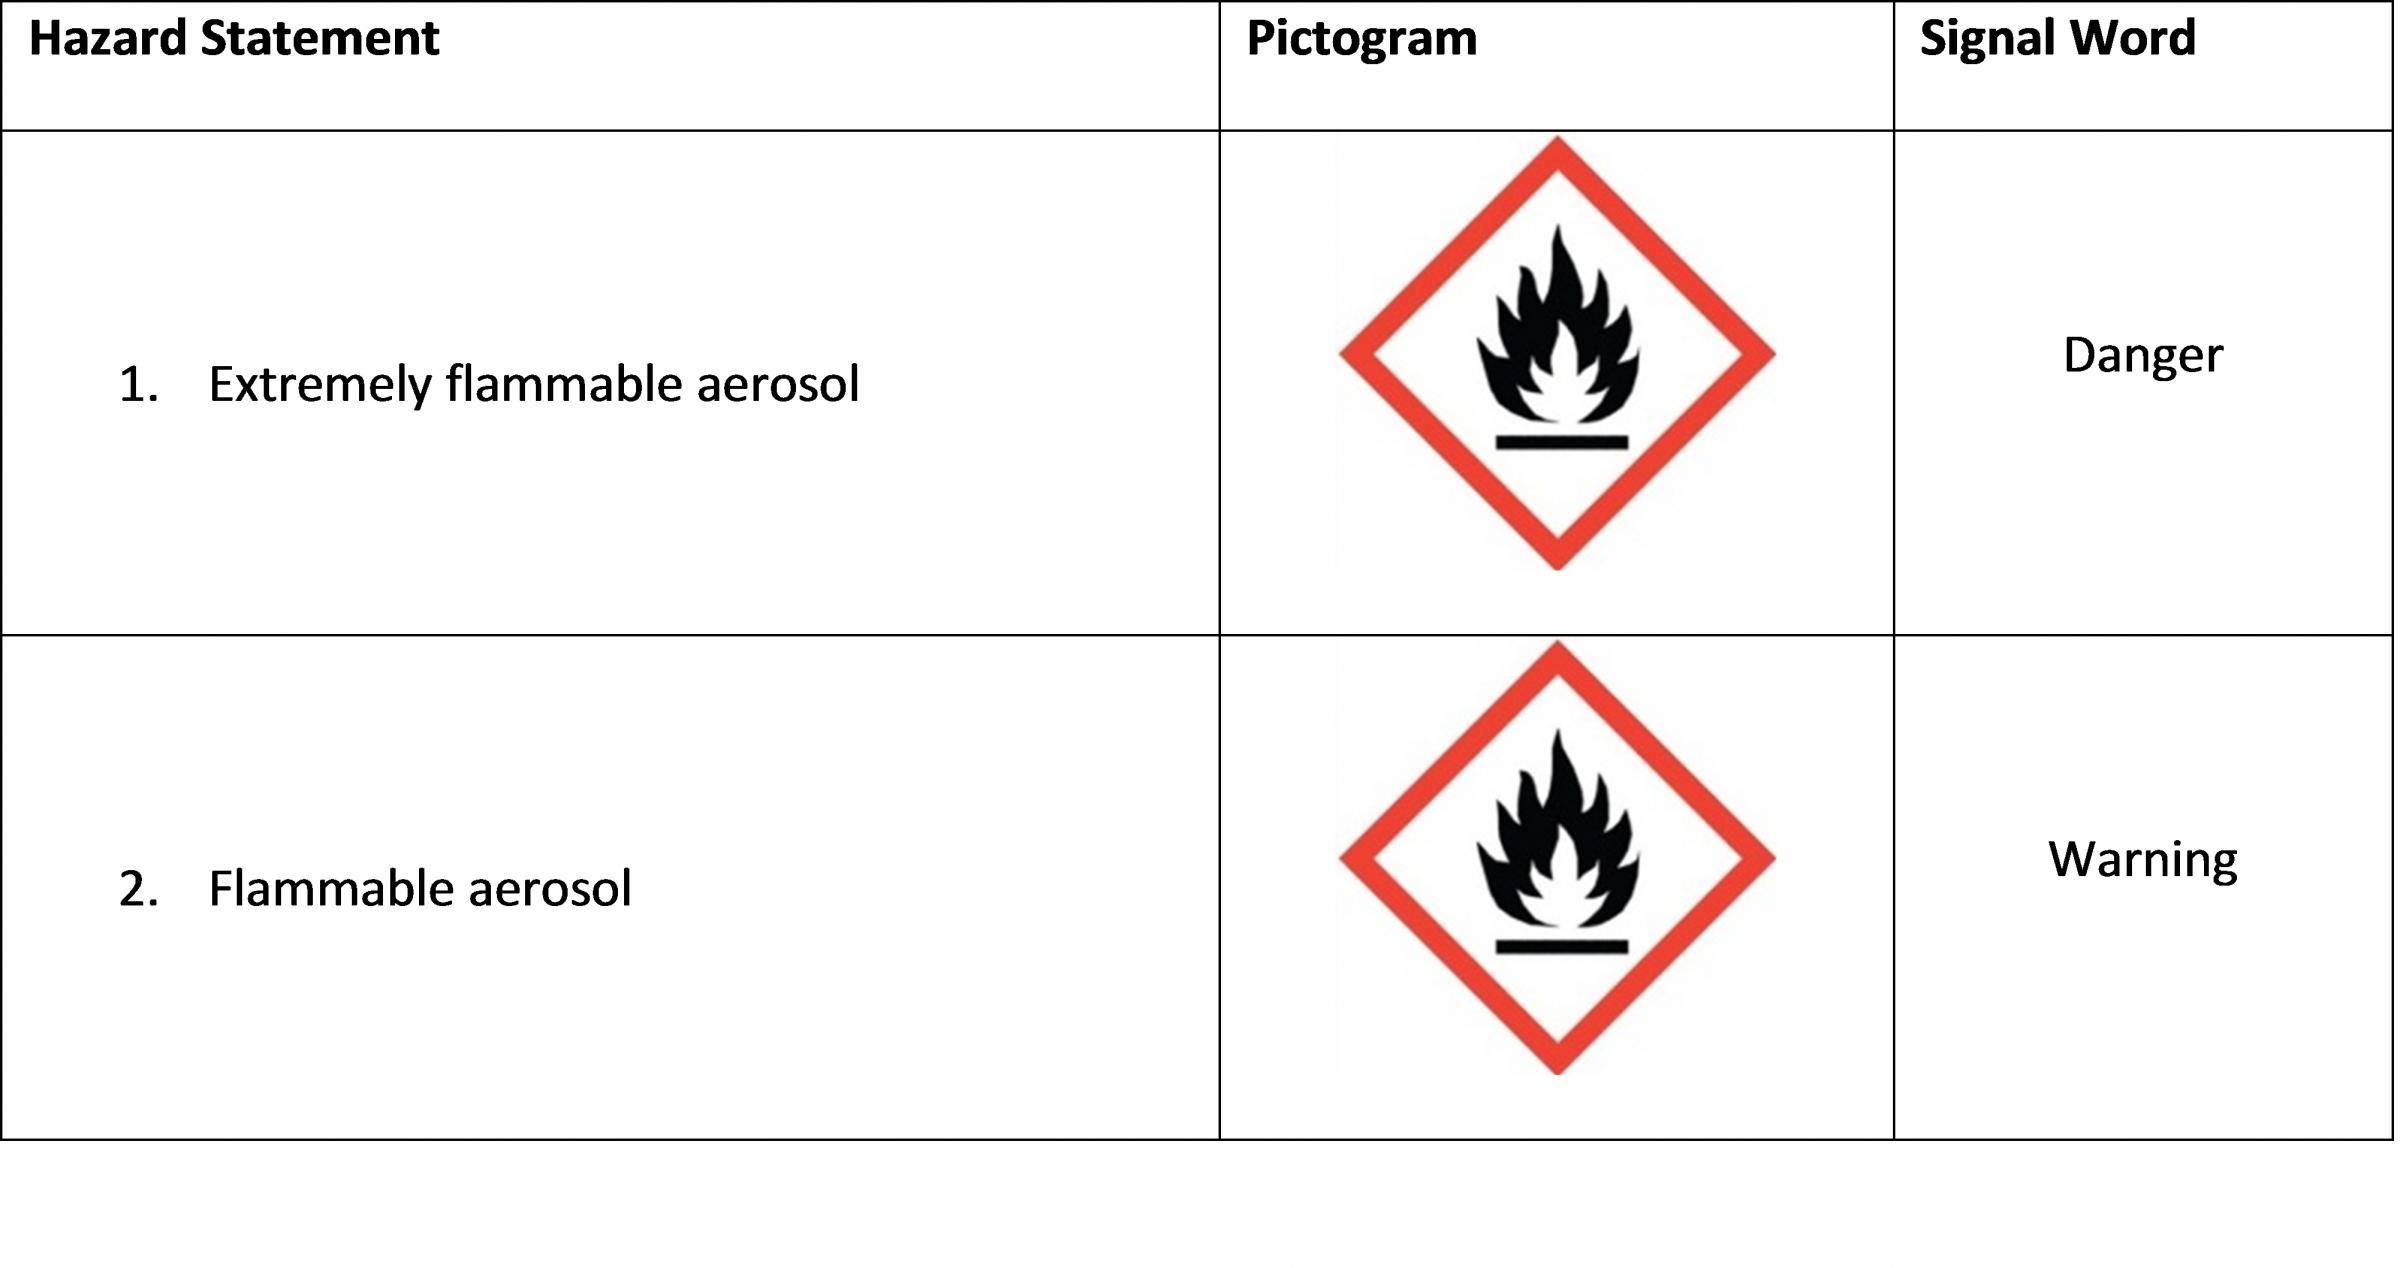 ghs pictograms flammable